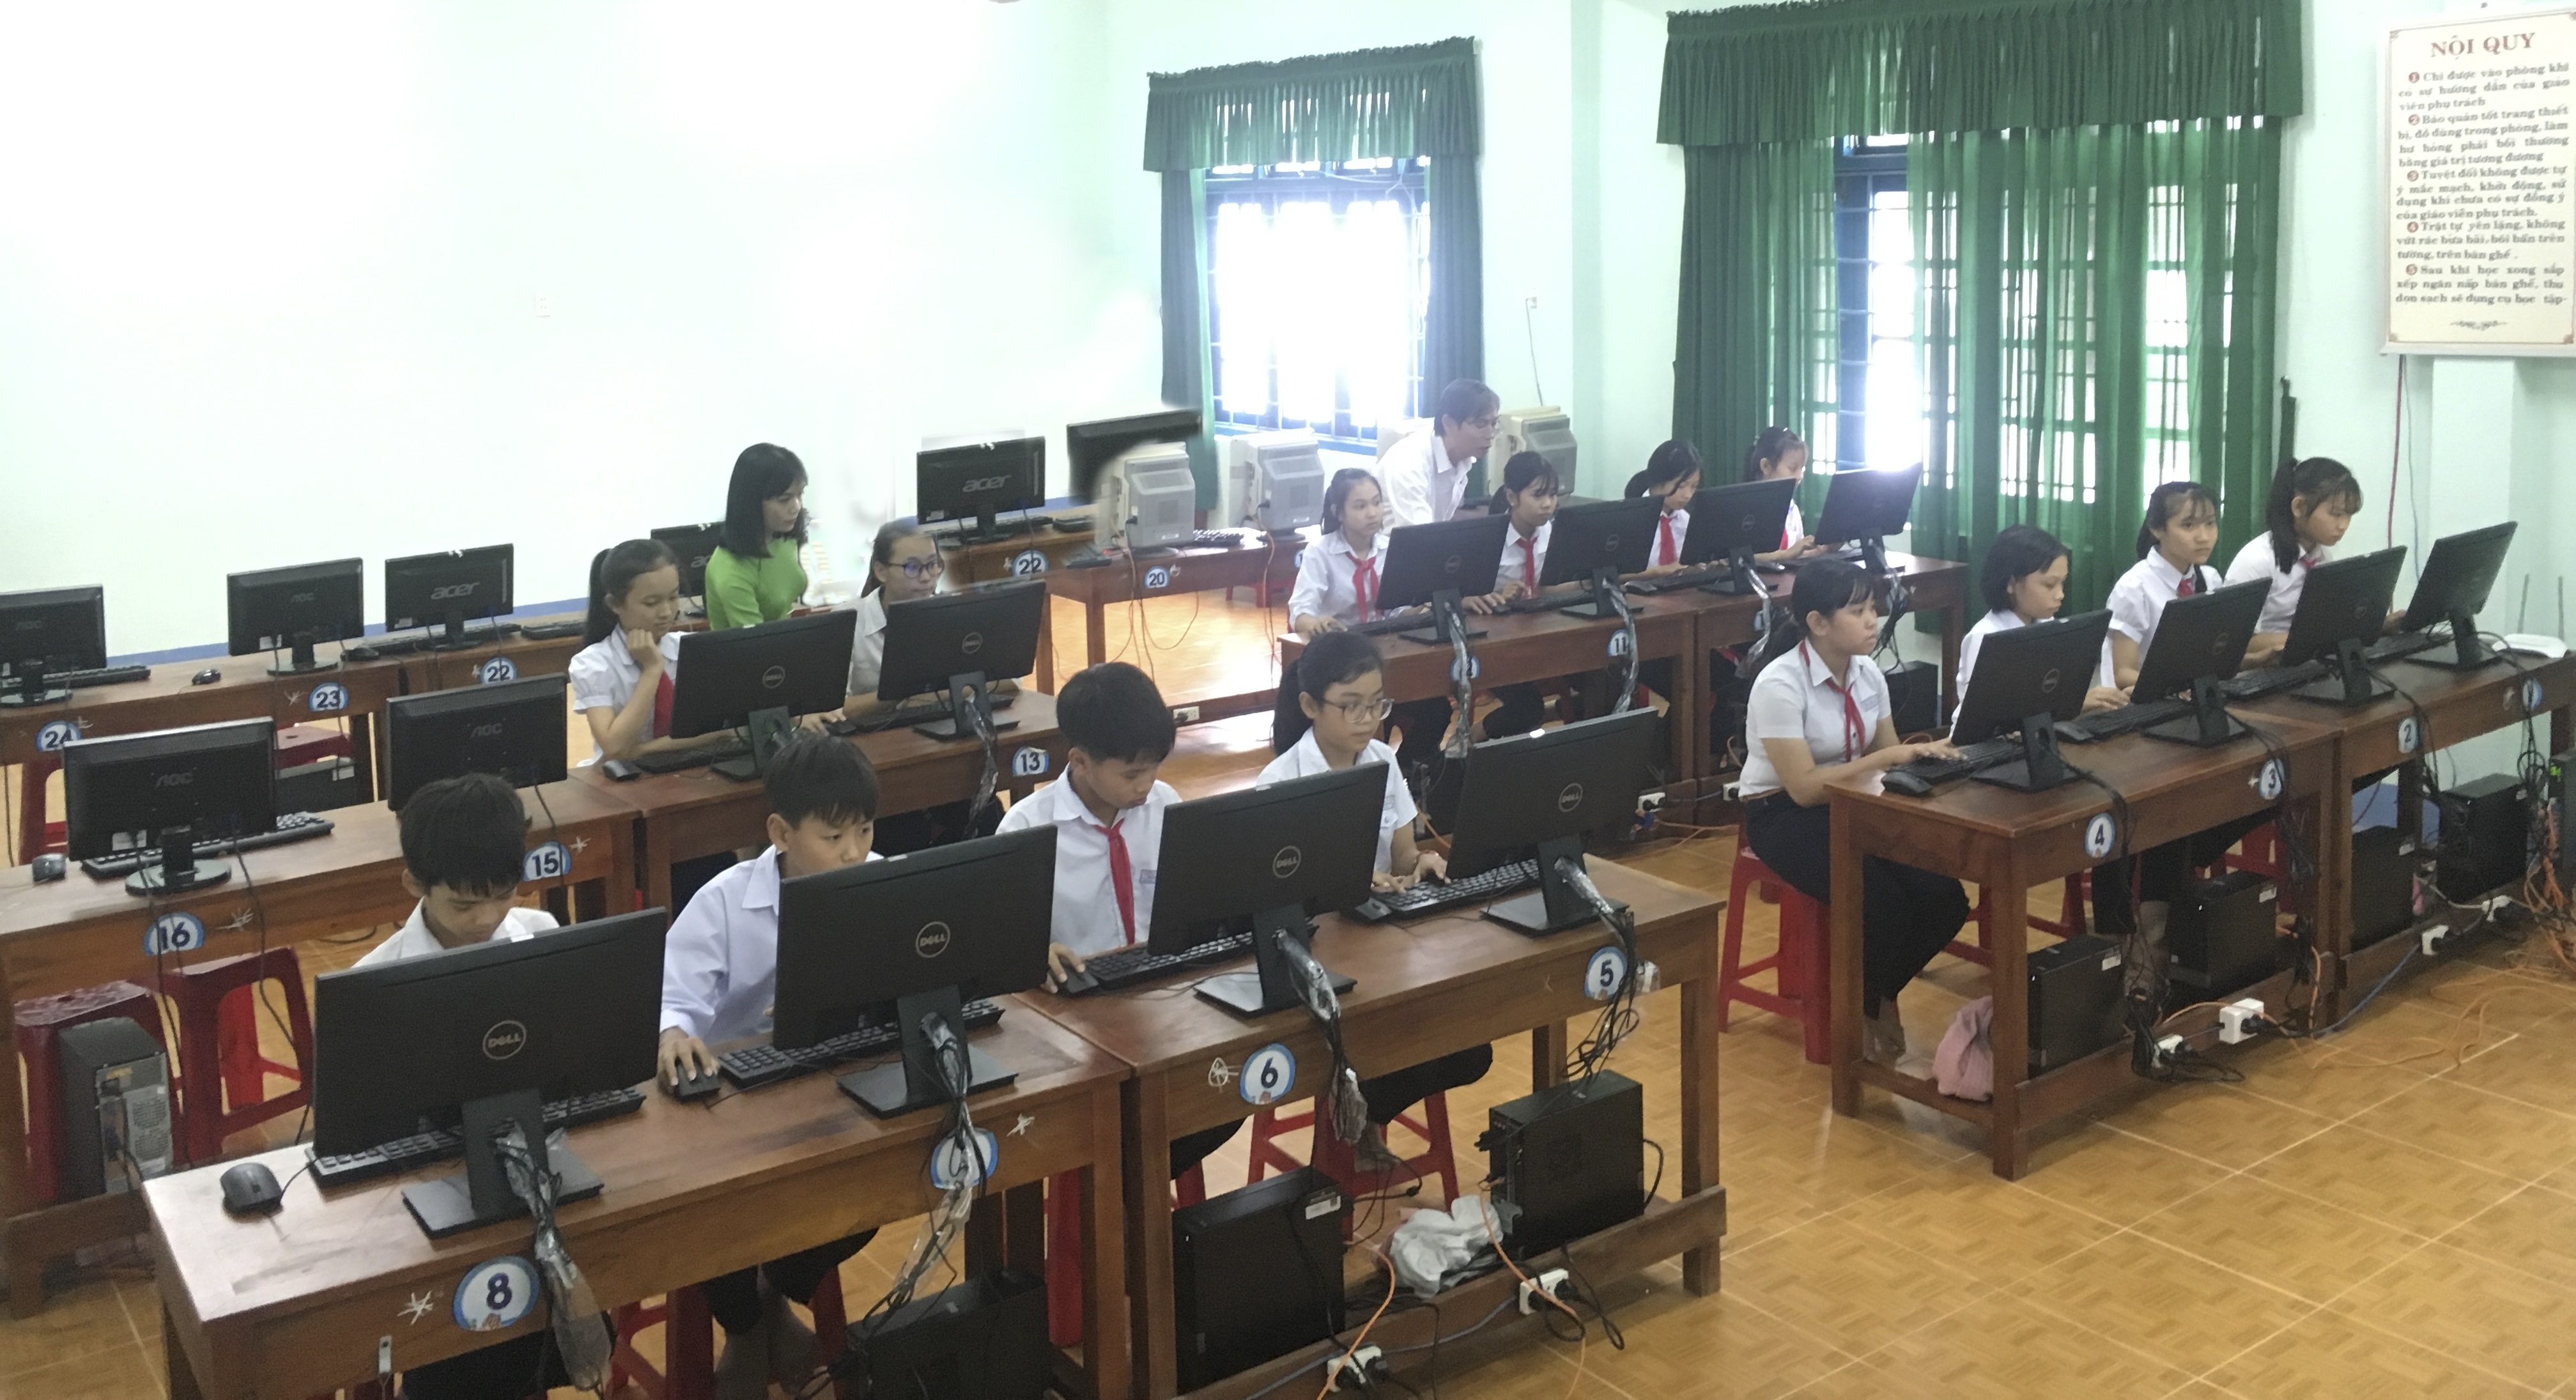 Students and teachers use donated computers at Tran Cao Van Secondary School in Dien Ban Town, Quang Nam Province.